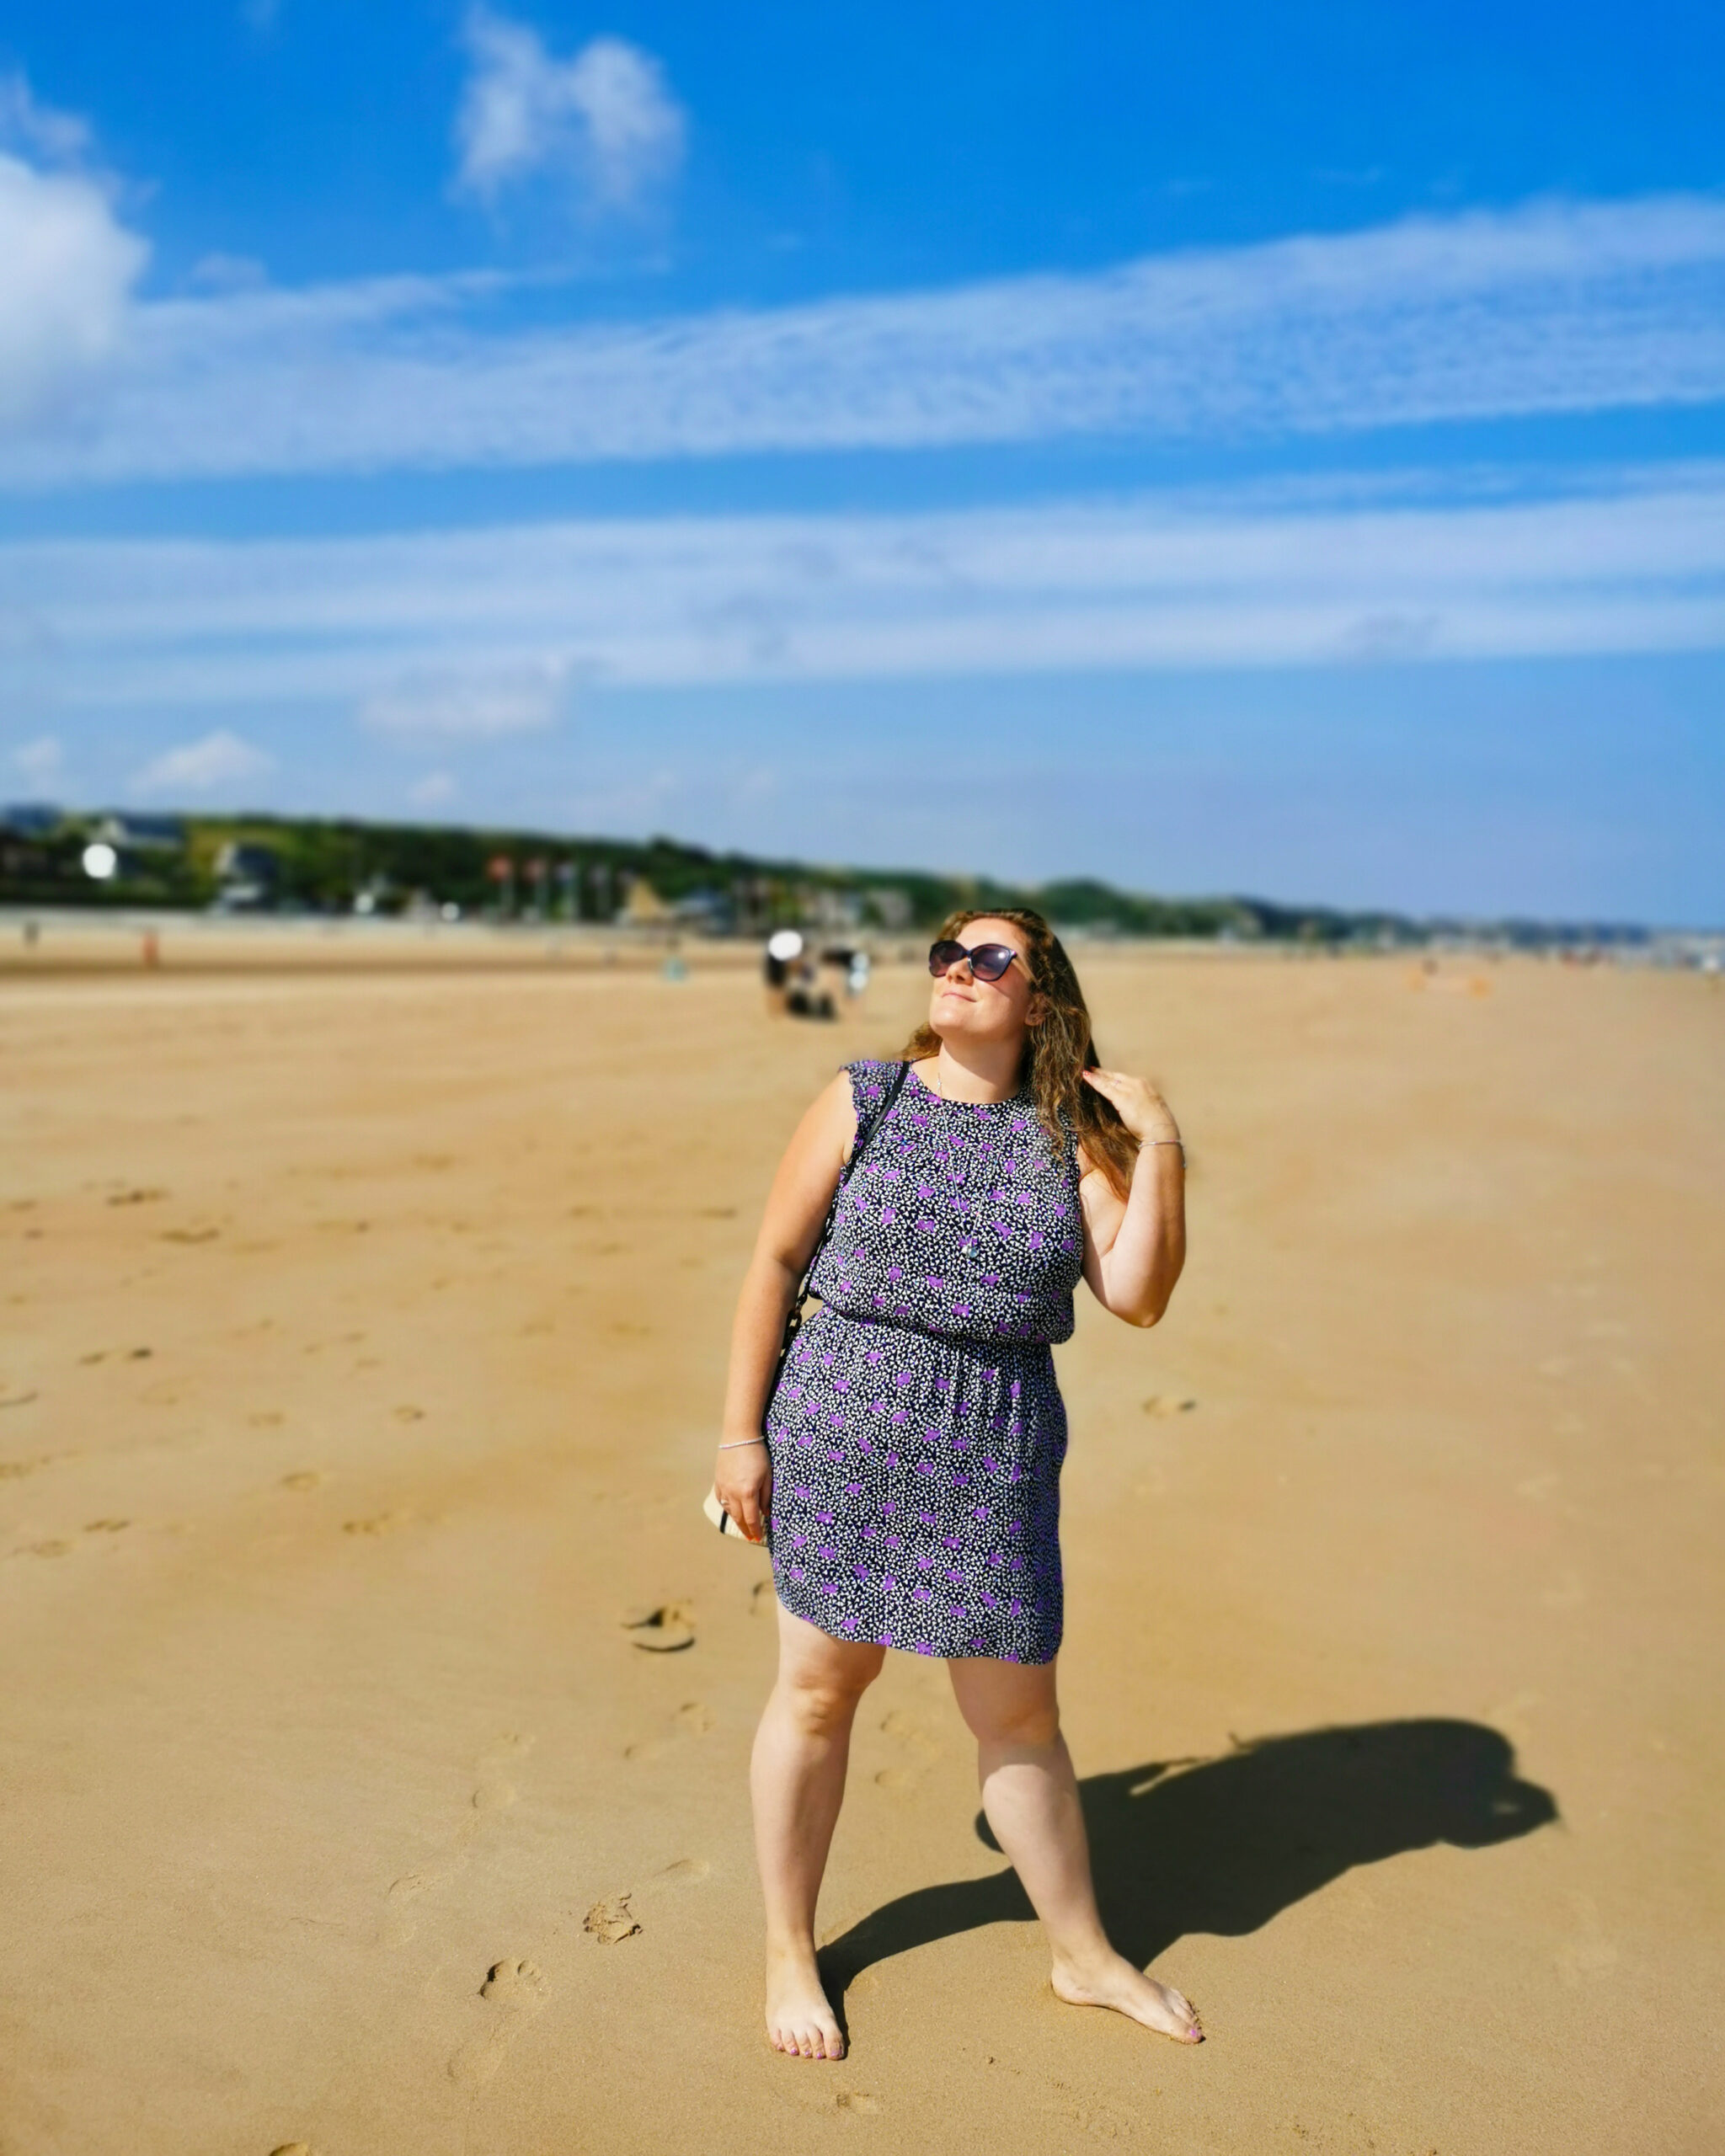 Things To Do In Normandy With Kids, Visit France, Visit Normandy, Normandy Tourism, Brittany Ferries, Family-Friendly, Family Holidays, Activities to Do, The Frenchie Mummy, Travel Blog, Family Travel, Cherbourg, French Beaches, WWII